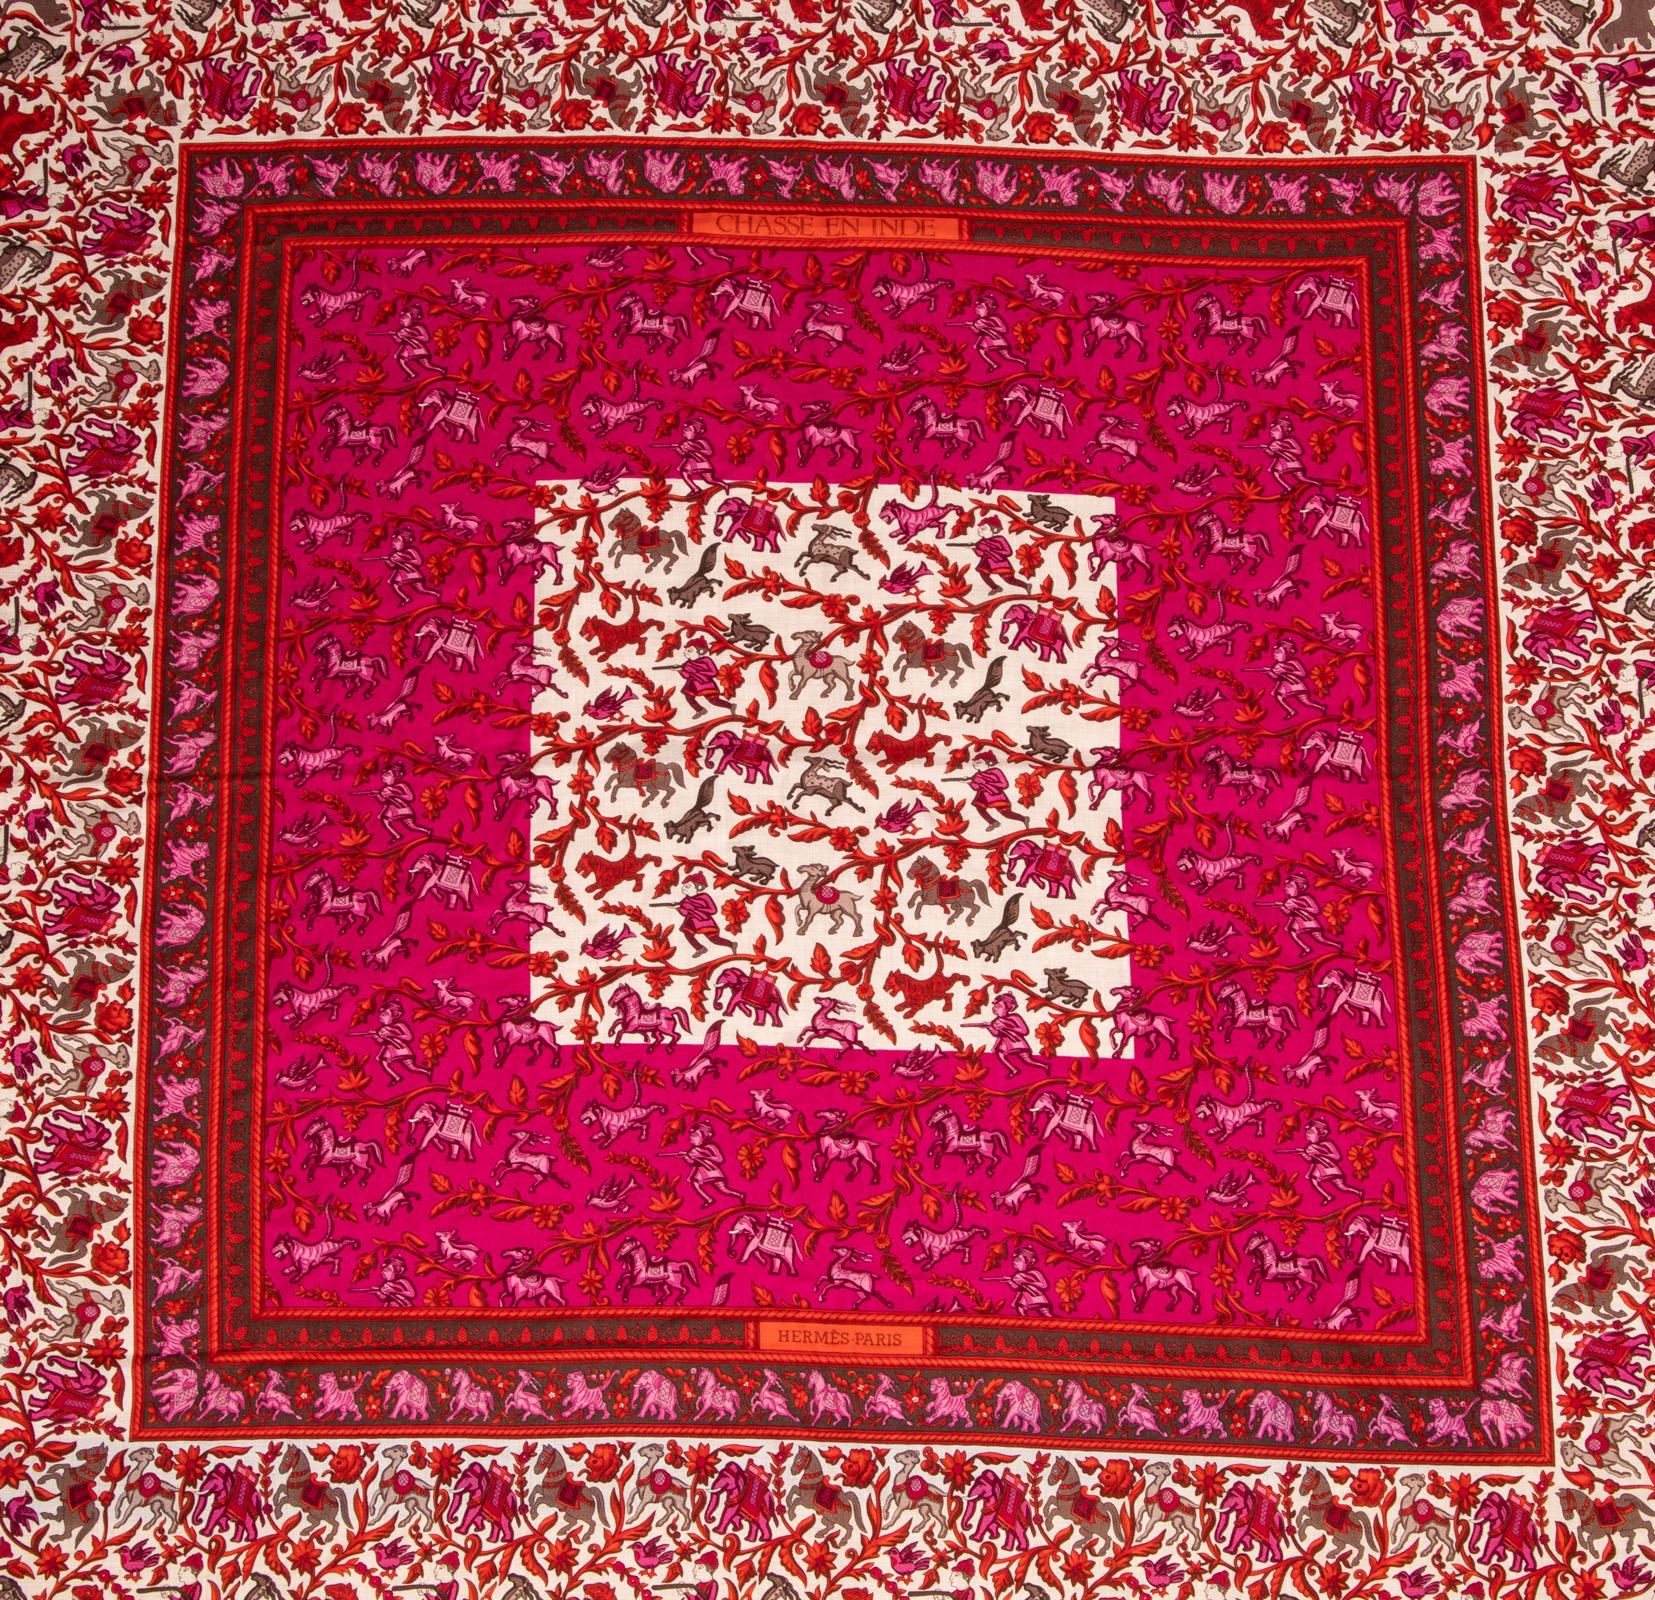 Guaranteed authentic Hermes vintage GM shawl 140cm in the coveted rare Chasse De Indie print.
Highly collectible print large cashmere and silk shawl.
In shades of fuchsia, reds, taupe and beige.
Extremely intricate resplendent with elephants,